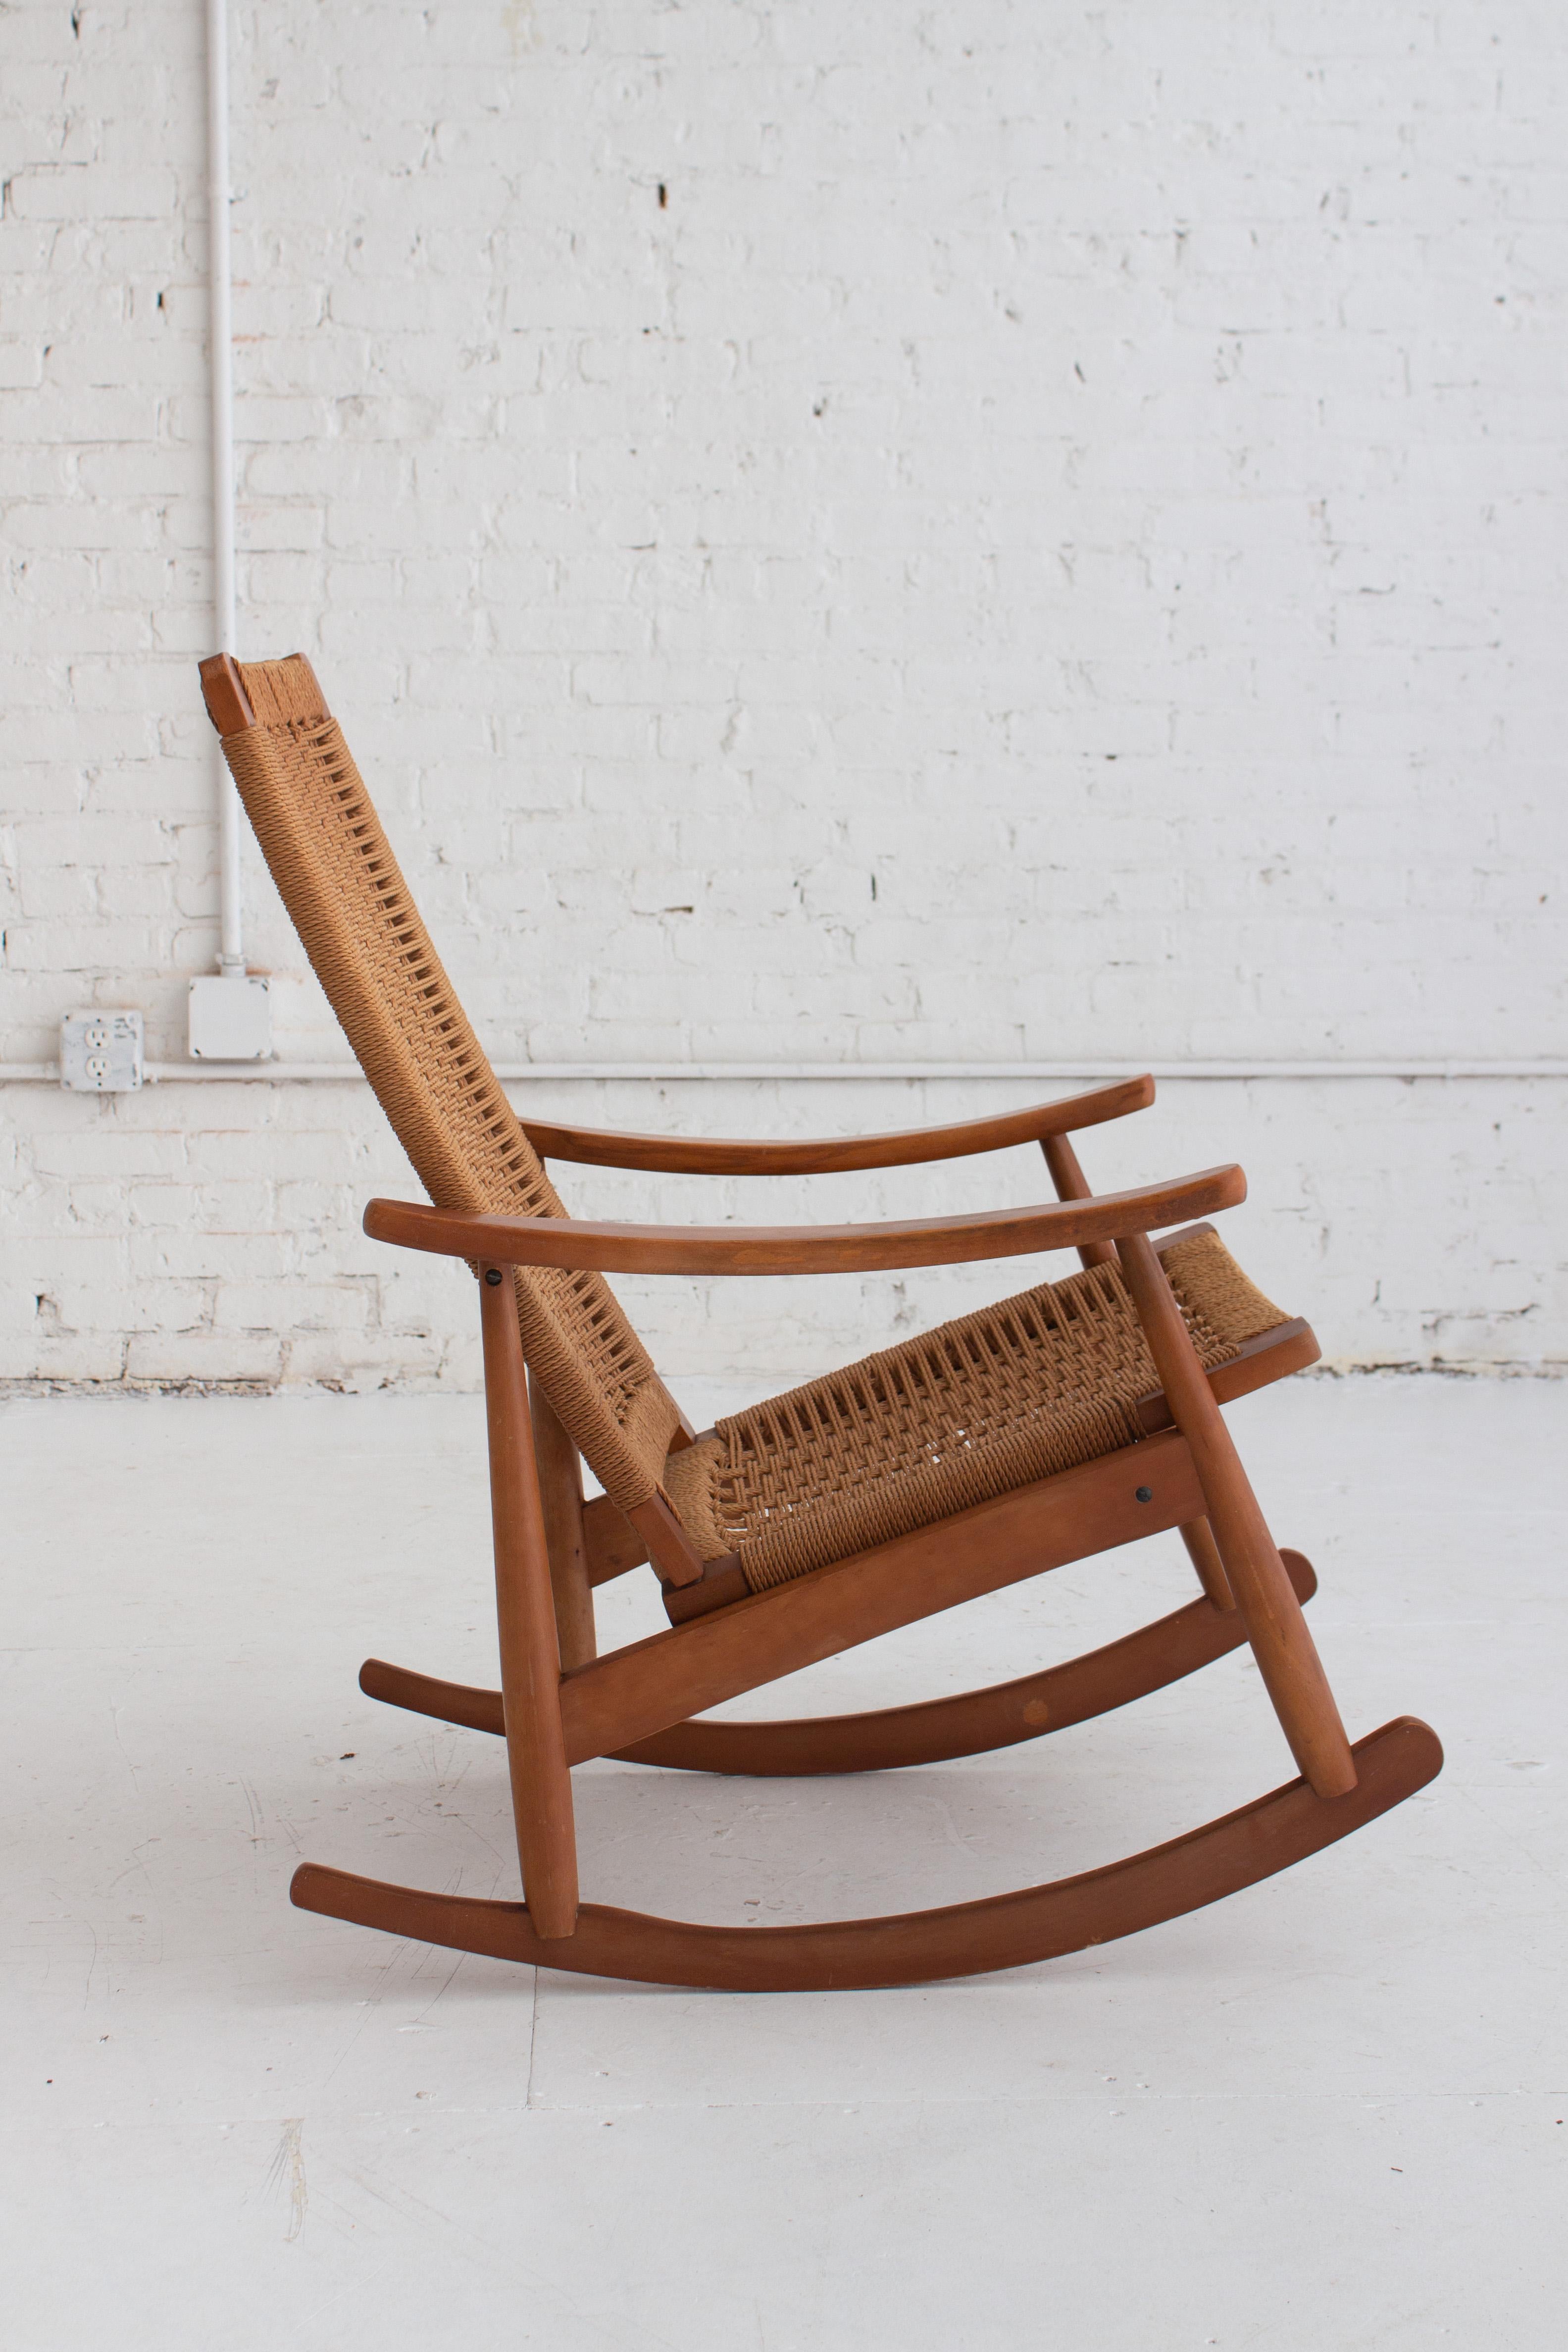 European Midcentury Rope Rocking Chair in the Style of Hans Wegner